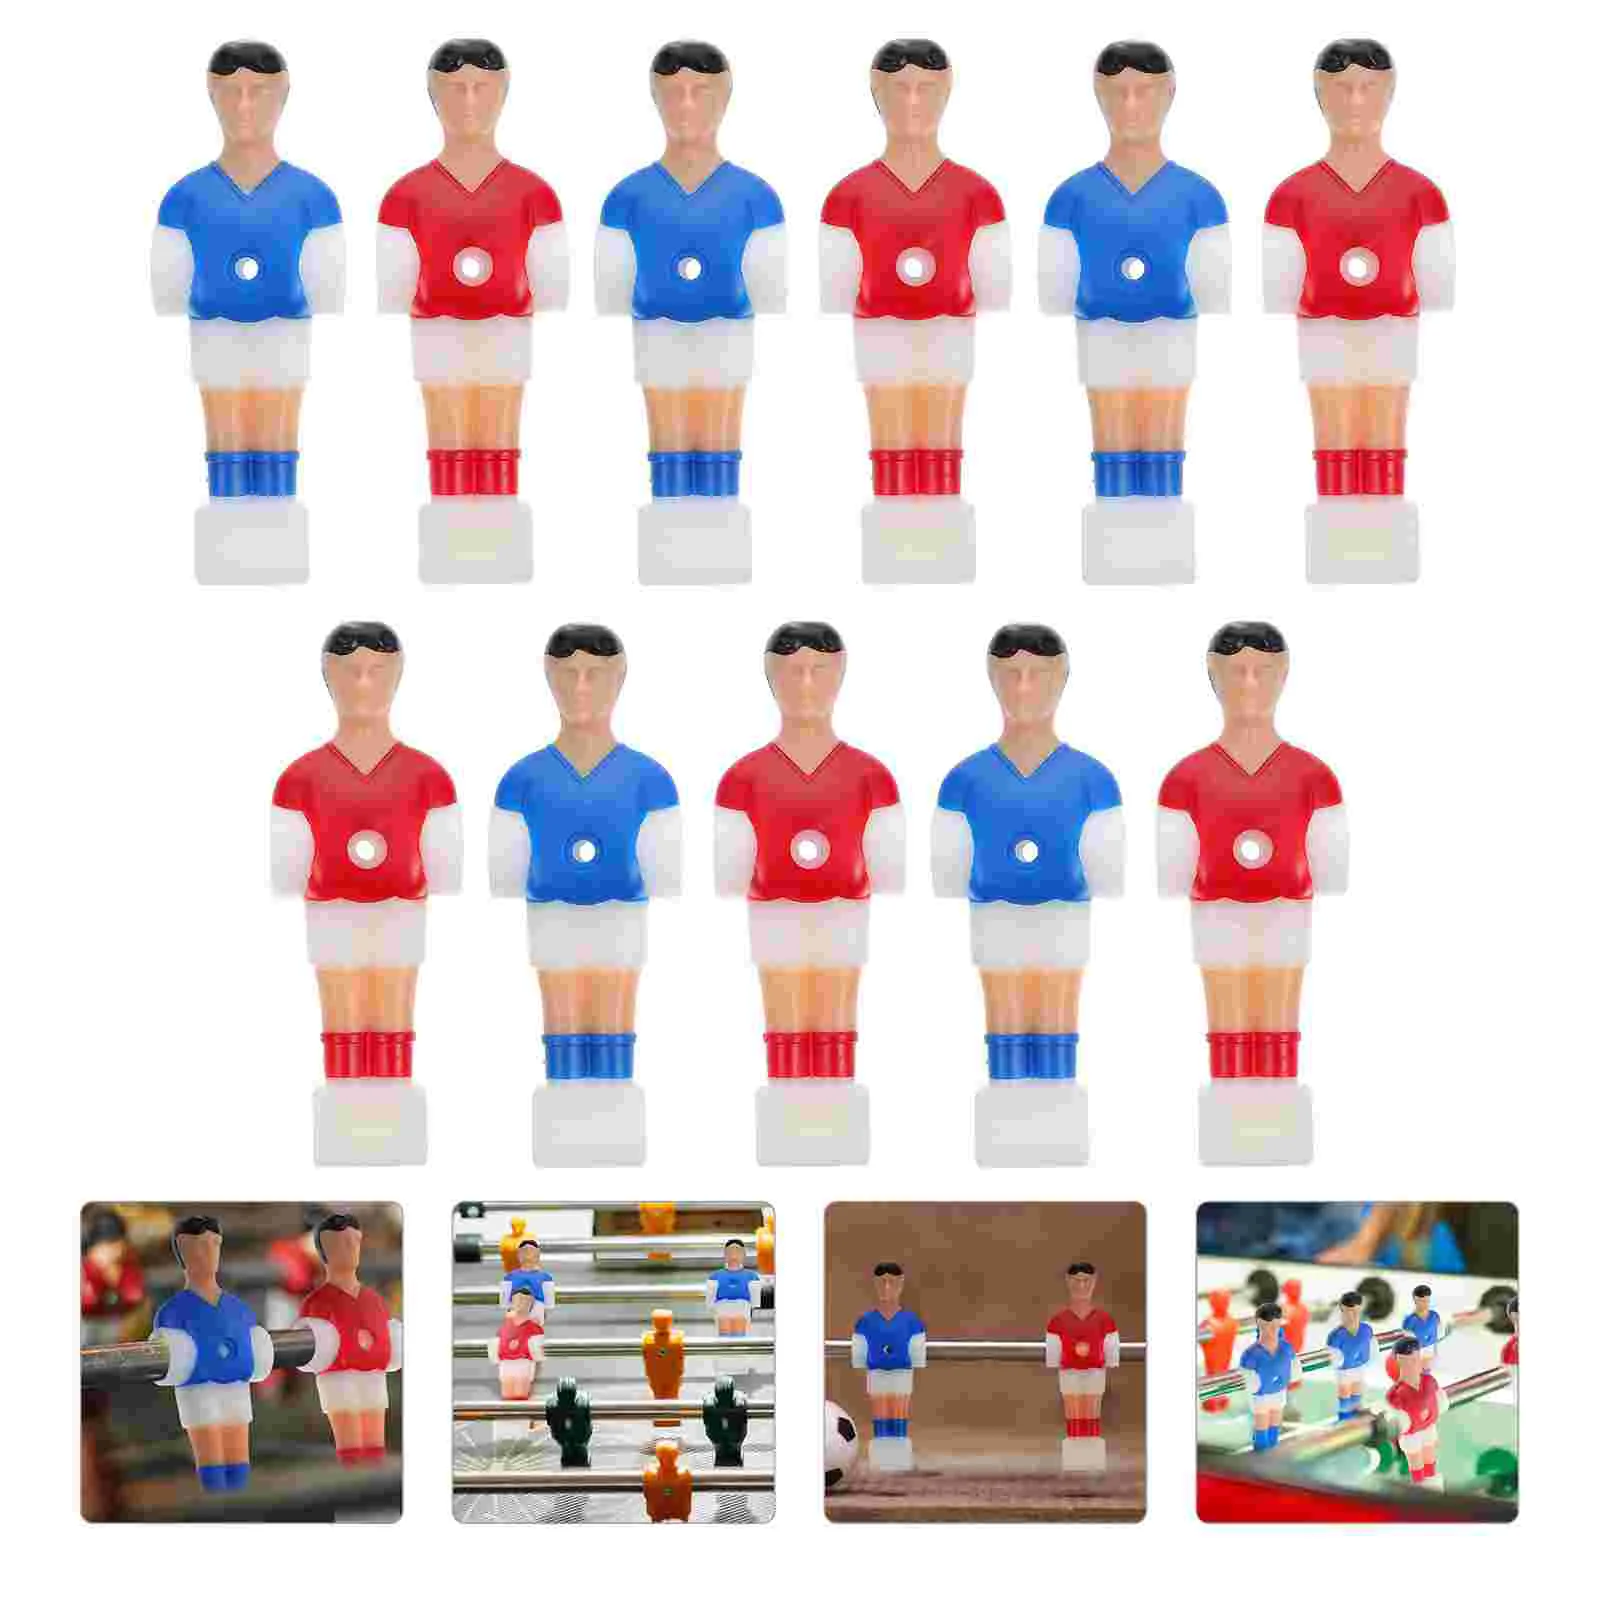 11 Pcs Man Football Machine Player Child Kids Soccer Figures Plastic Foosball Table Parts 2 pcs foosball table football plastic soccer ball football fussball soccerball sport gifts round indoor games 32mm 36mm